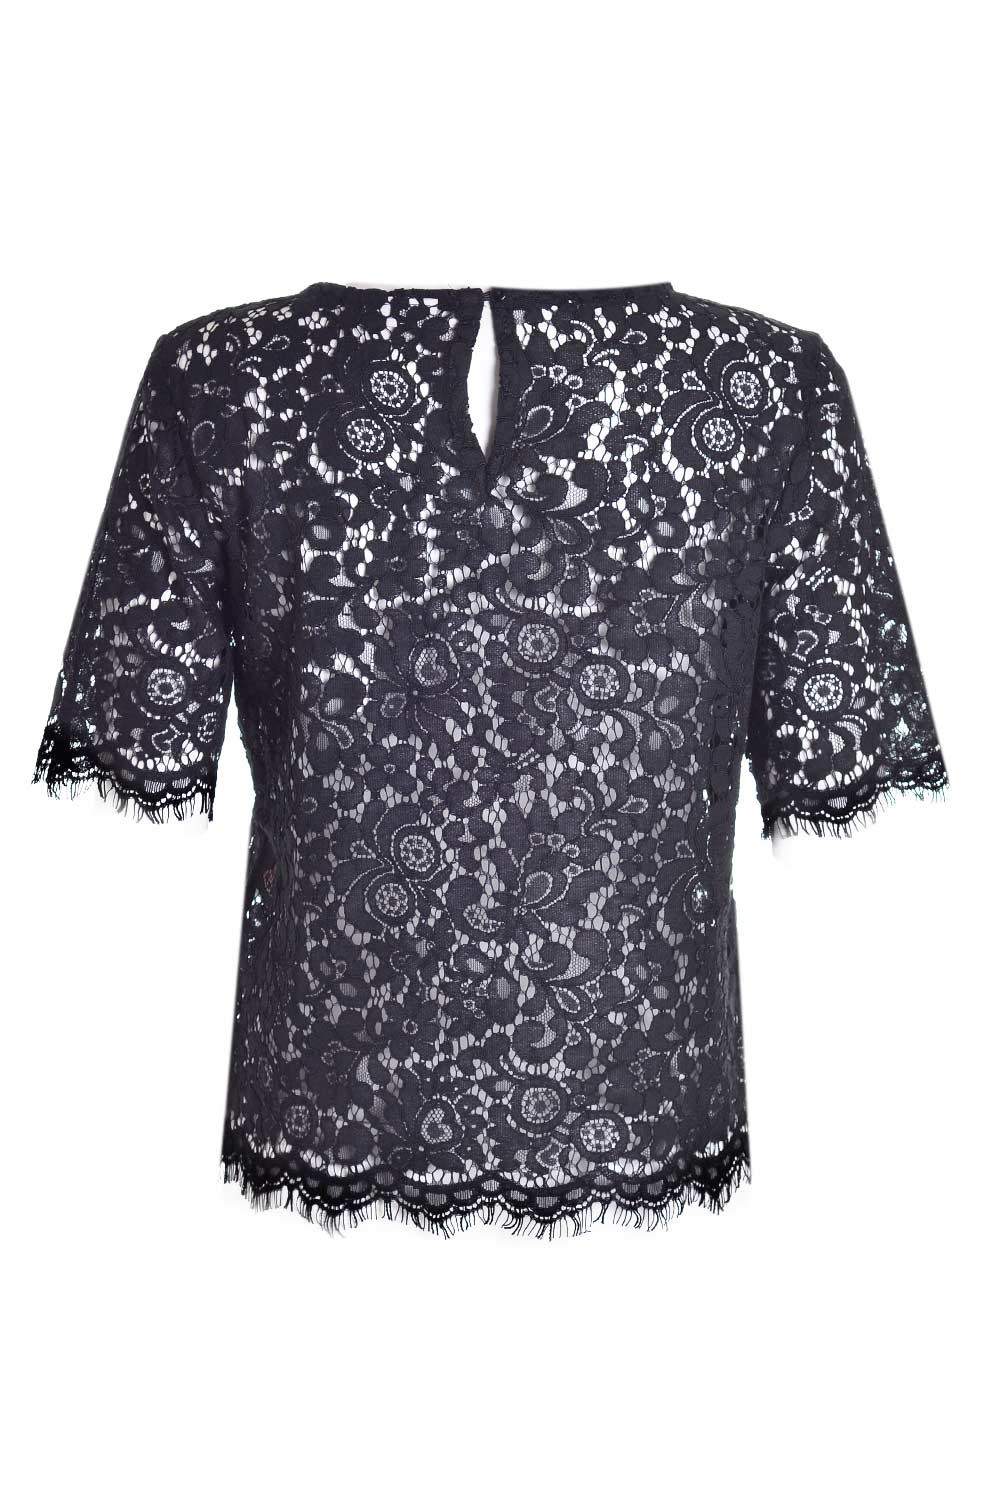 Only Vivian Papla Lace Top in Black | iCLOTHING